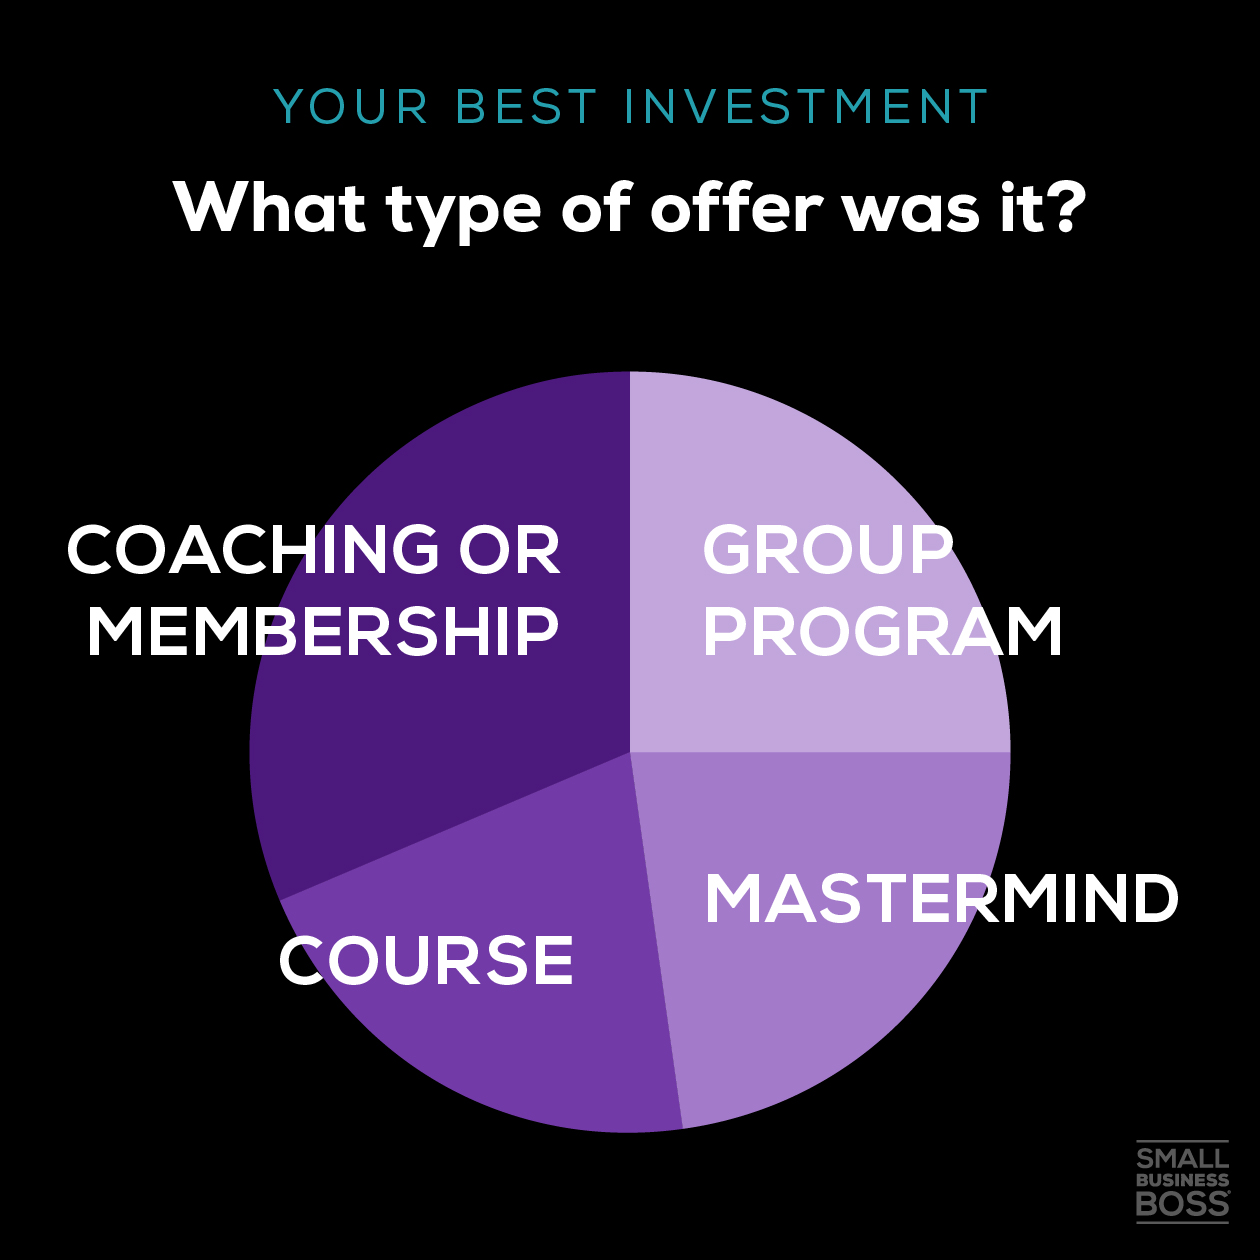 pie chart of the types of best investment offers